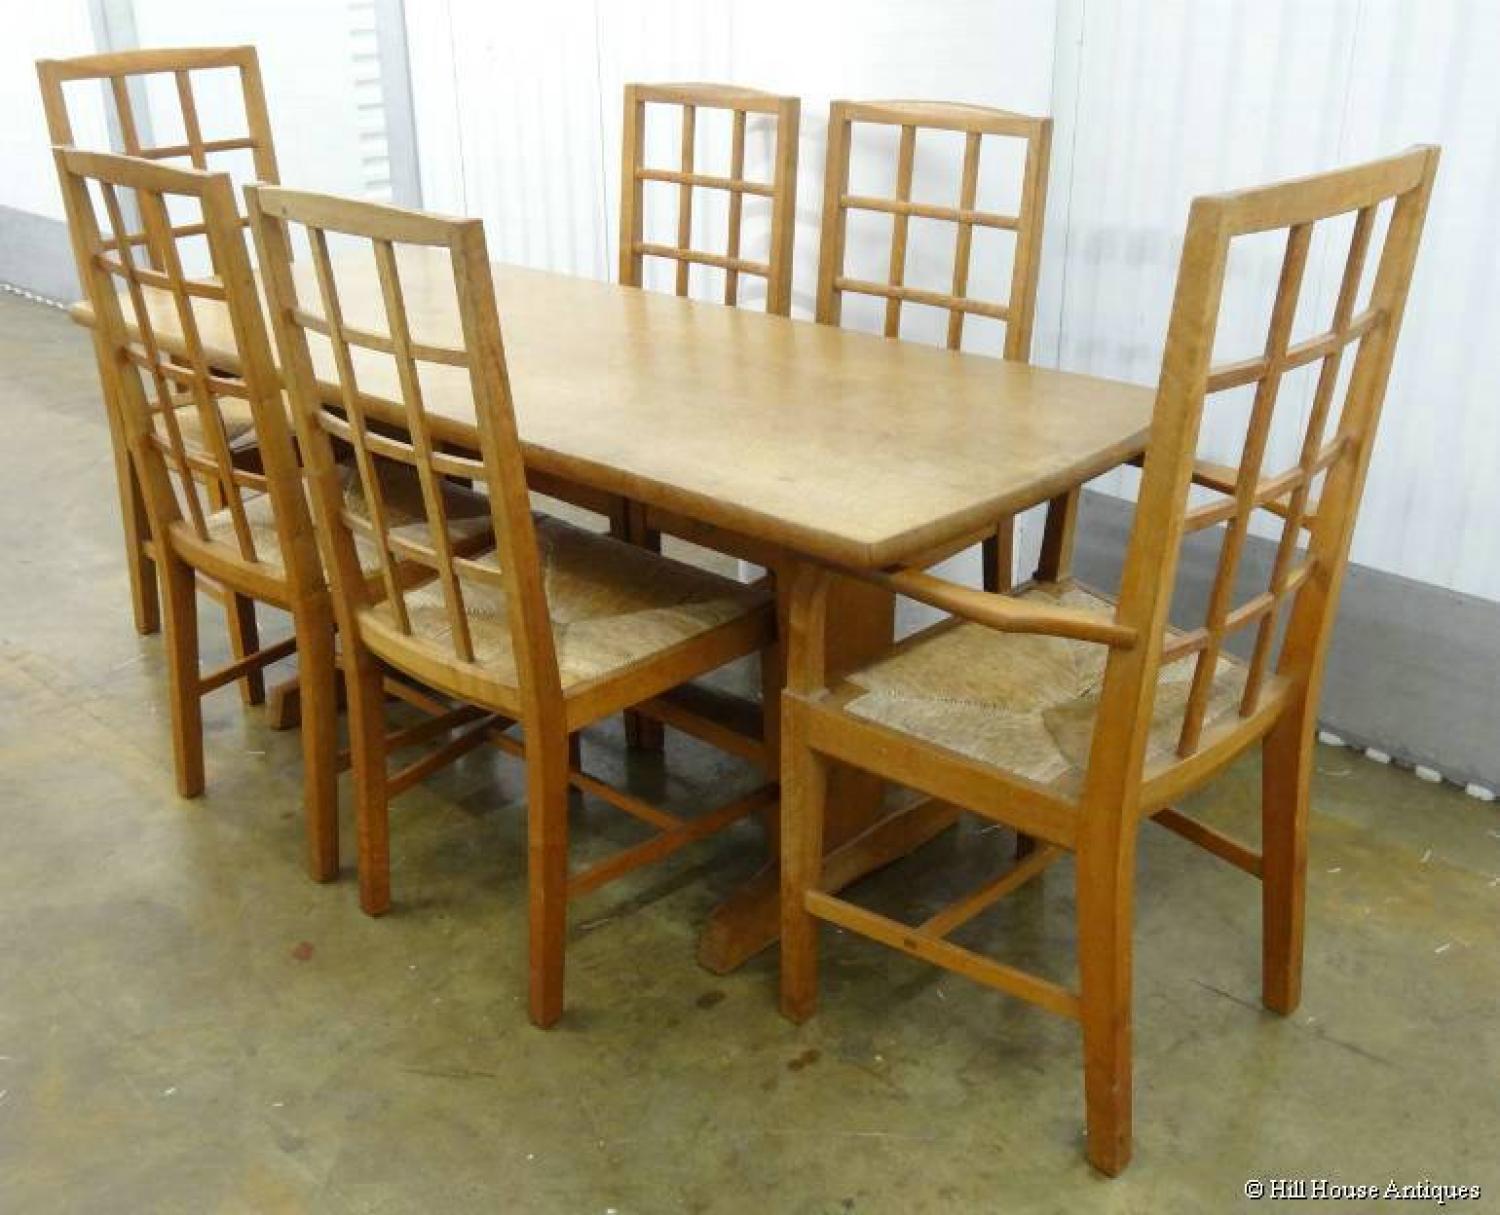 Rare Oliver Morel Cotswold School Arts & Crafts dining table & chairs